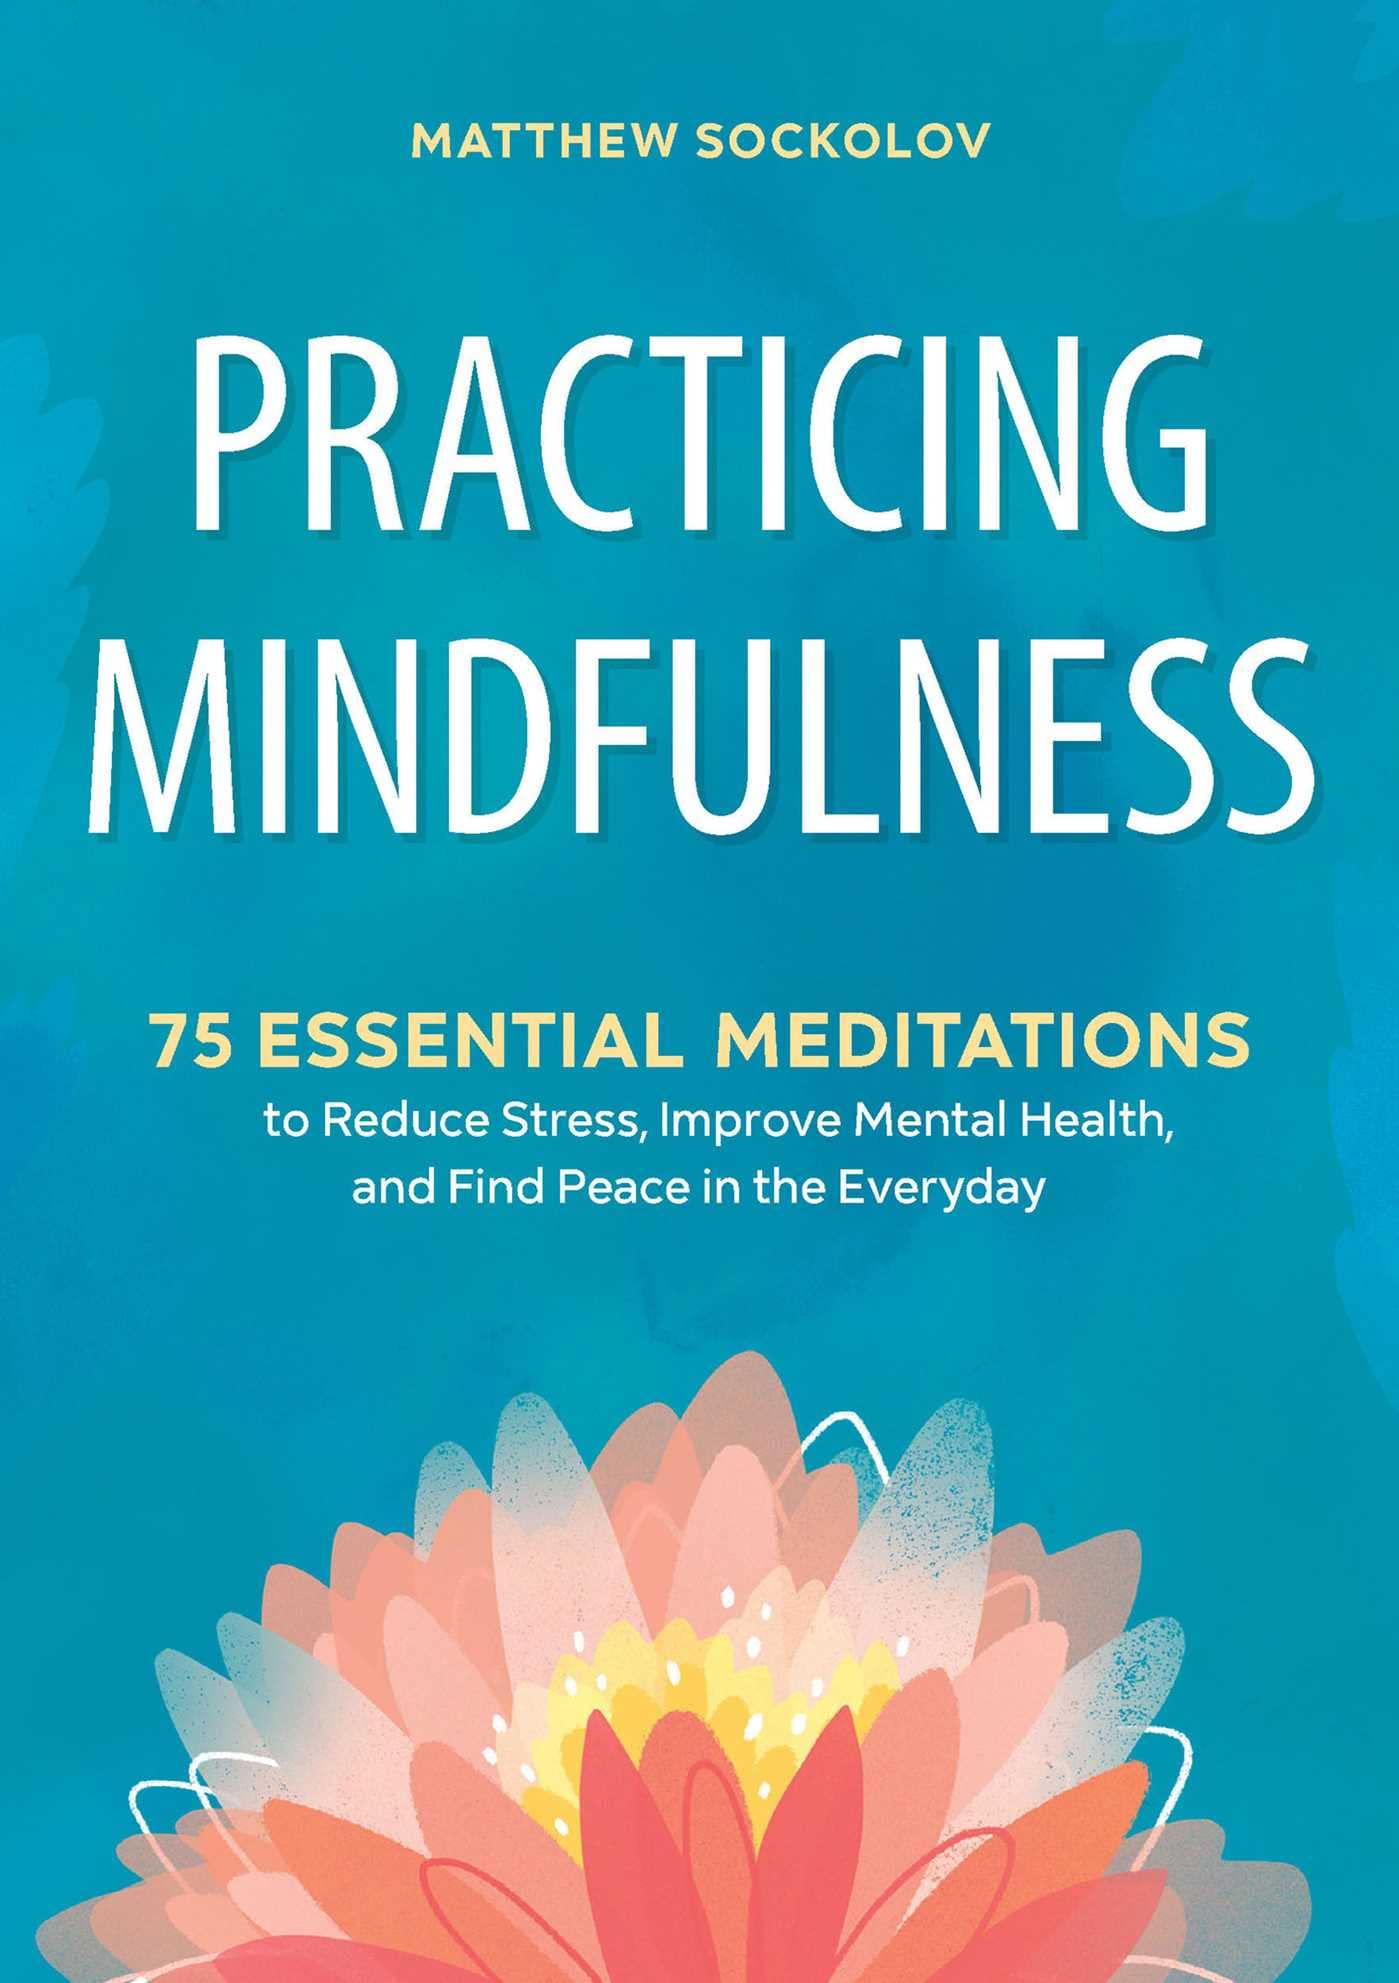 Practicing Mindfulness: 75 Essential Meditations to Reduce Stress, Improve Mental Health, and Find Peace in the Everyday by Sockolov, Matthew